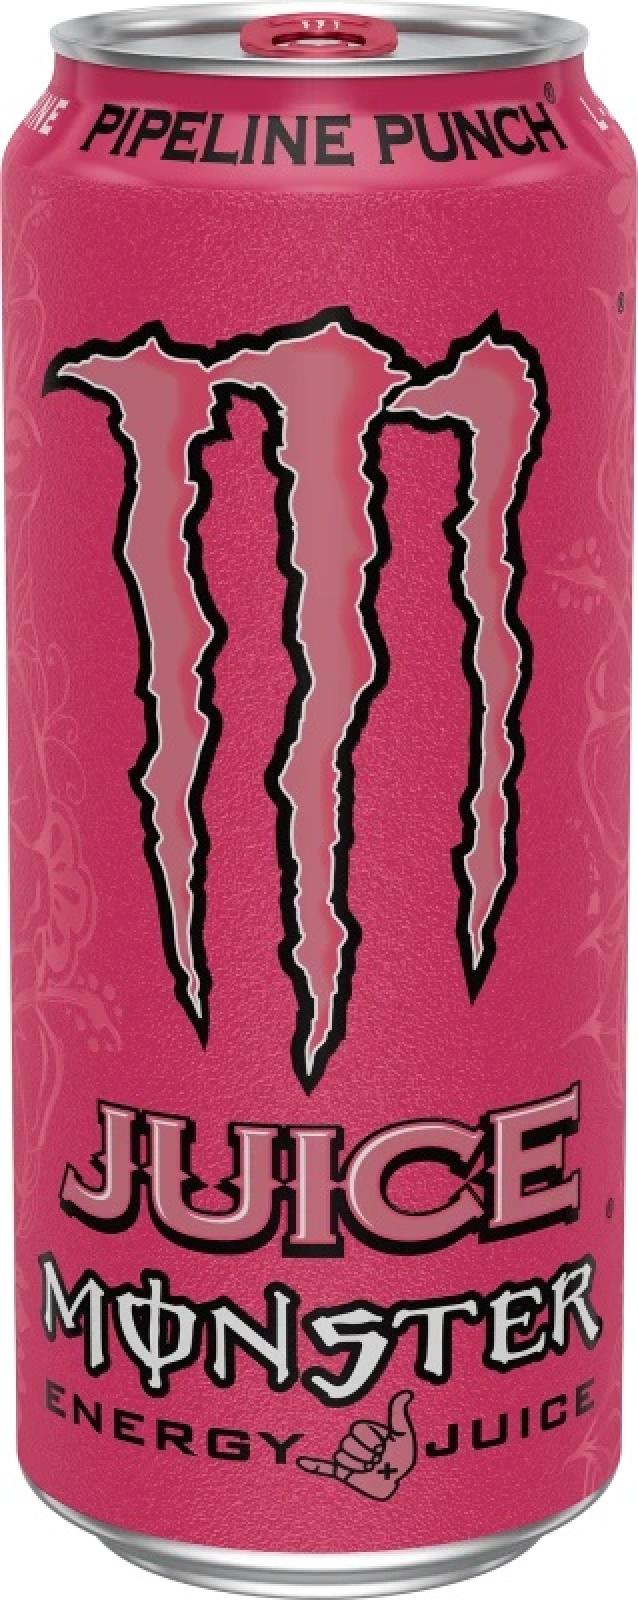 content/products/Juice Monster Pipeline Punch